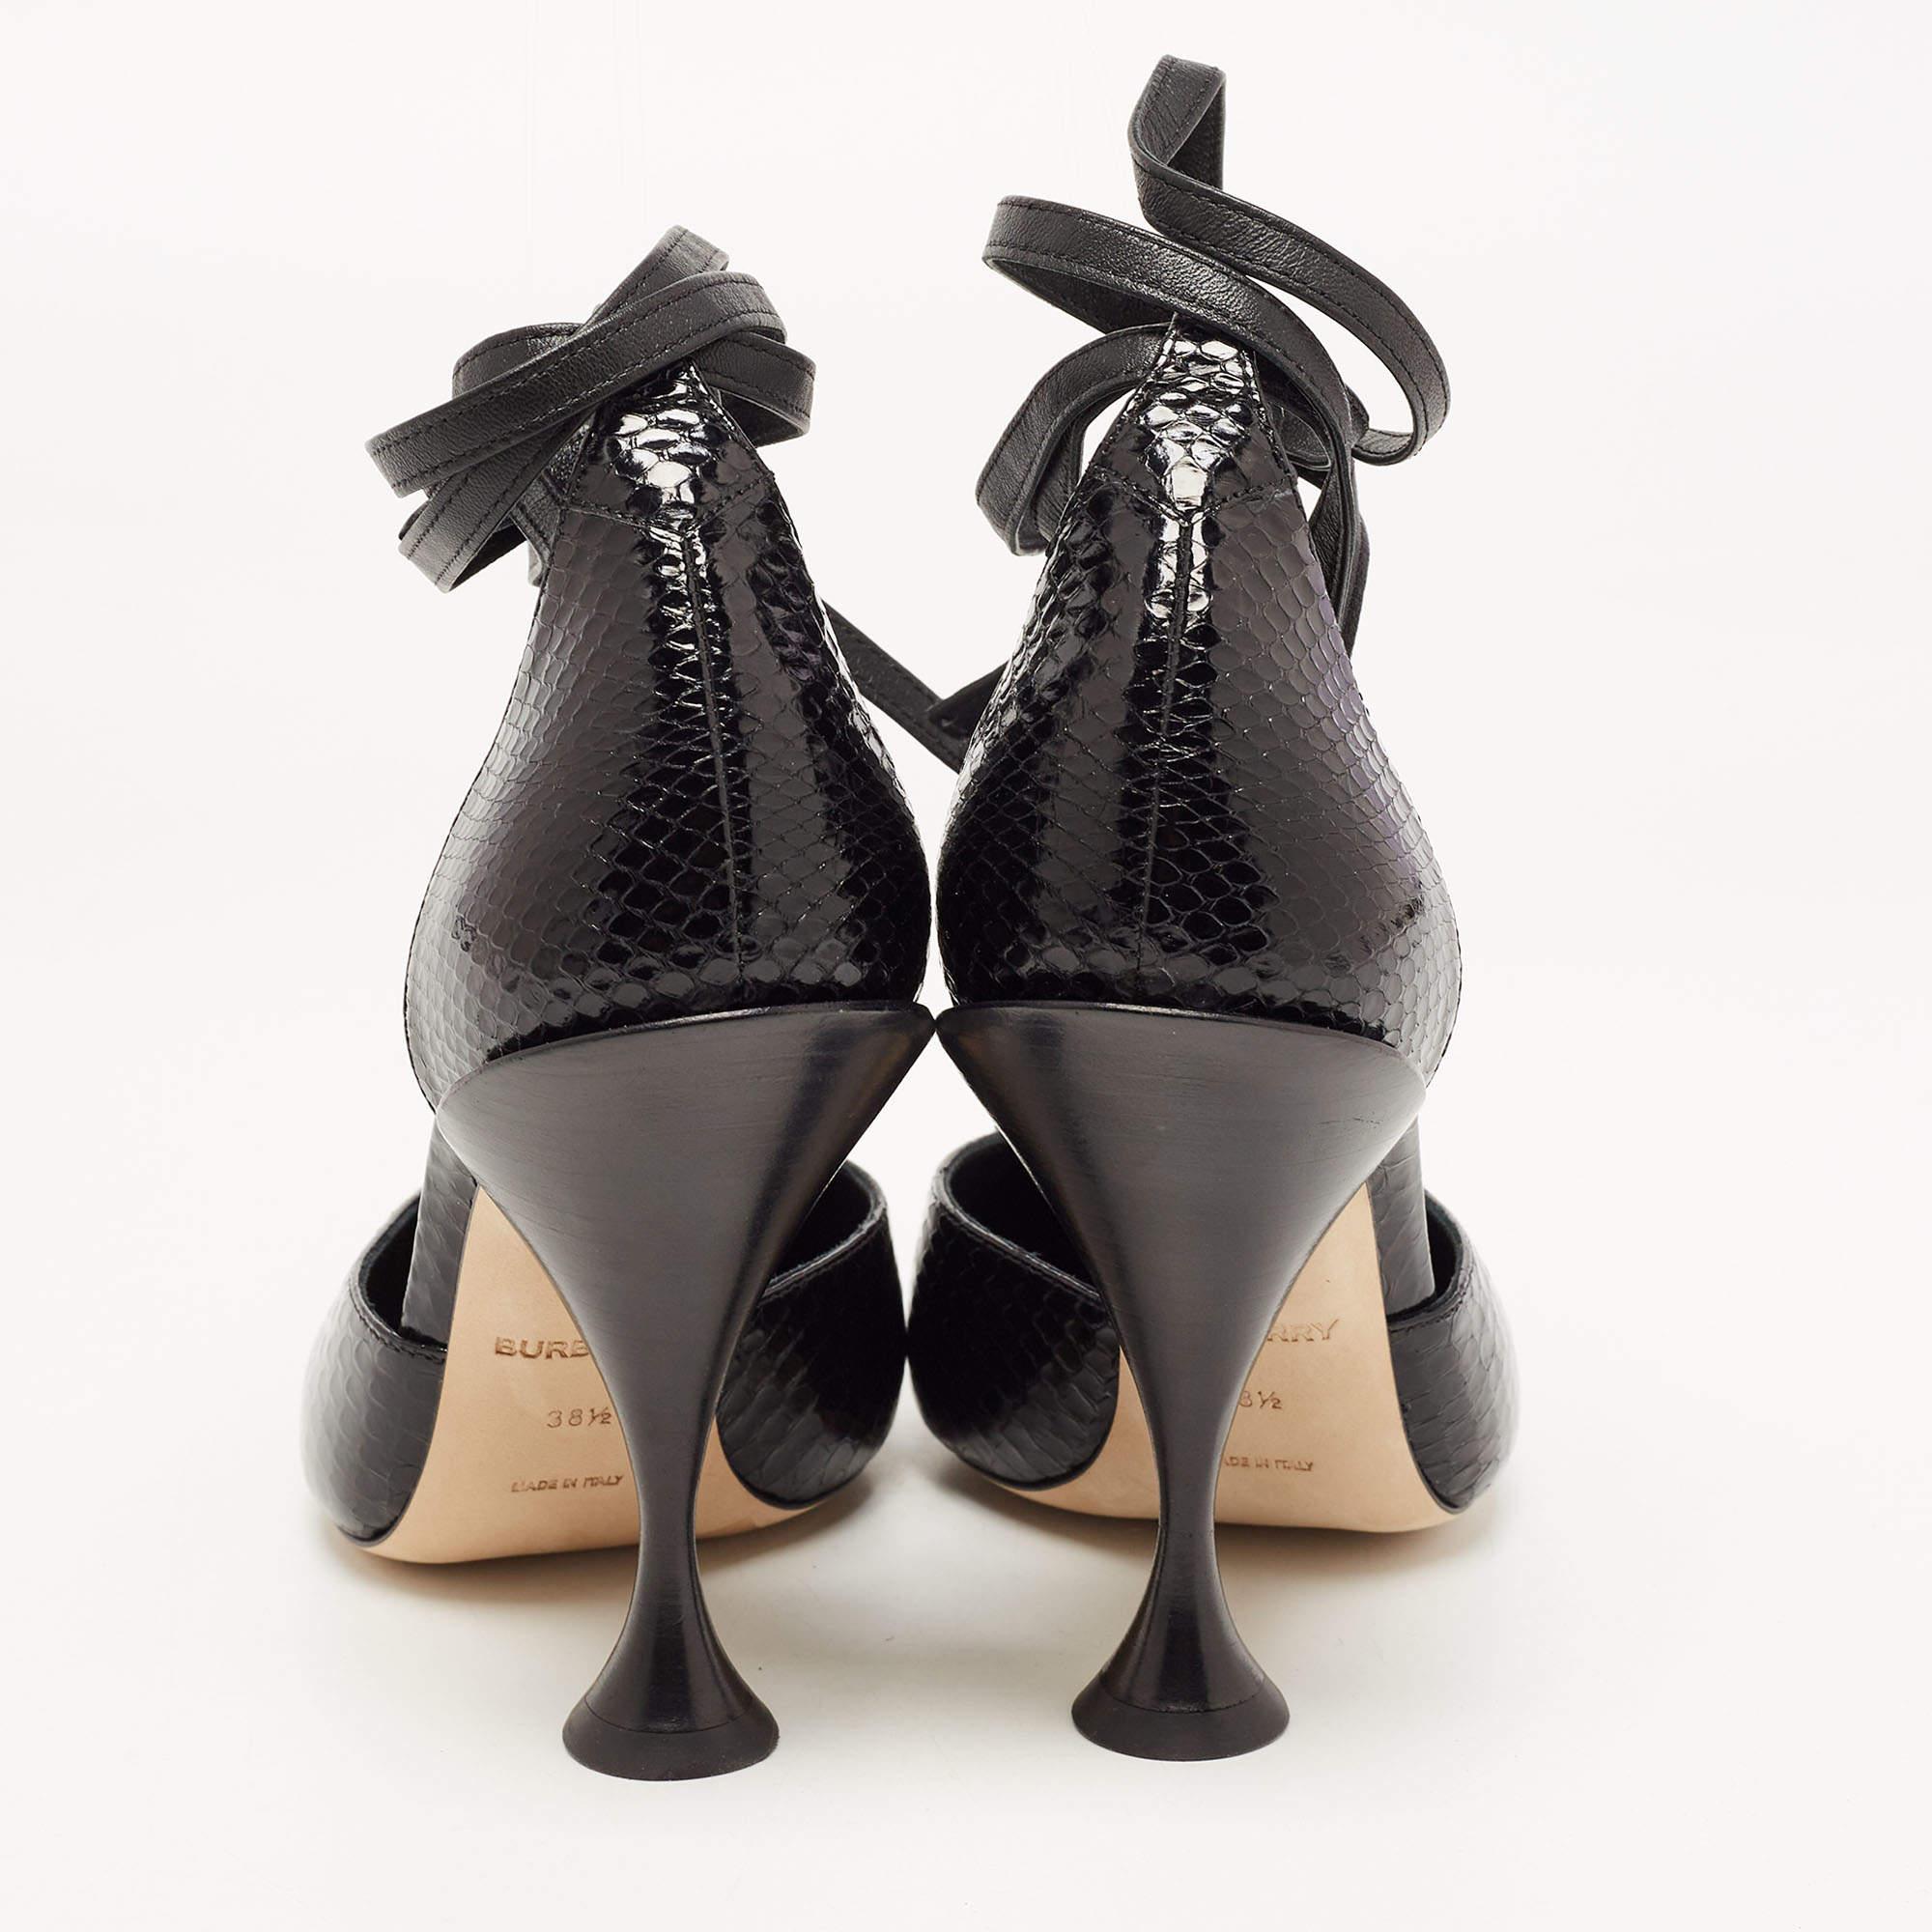 Defined by luxe cuts, unique details, and durable construction, this pair by Burberry has all the qualities of a fashionable shoe. Called the Welton, the pump features a leather body, chain ankle trim, leather ankle ties, and carved high heels.

